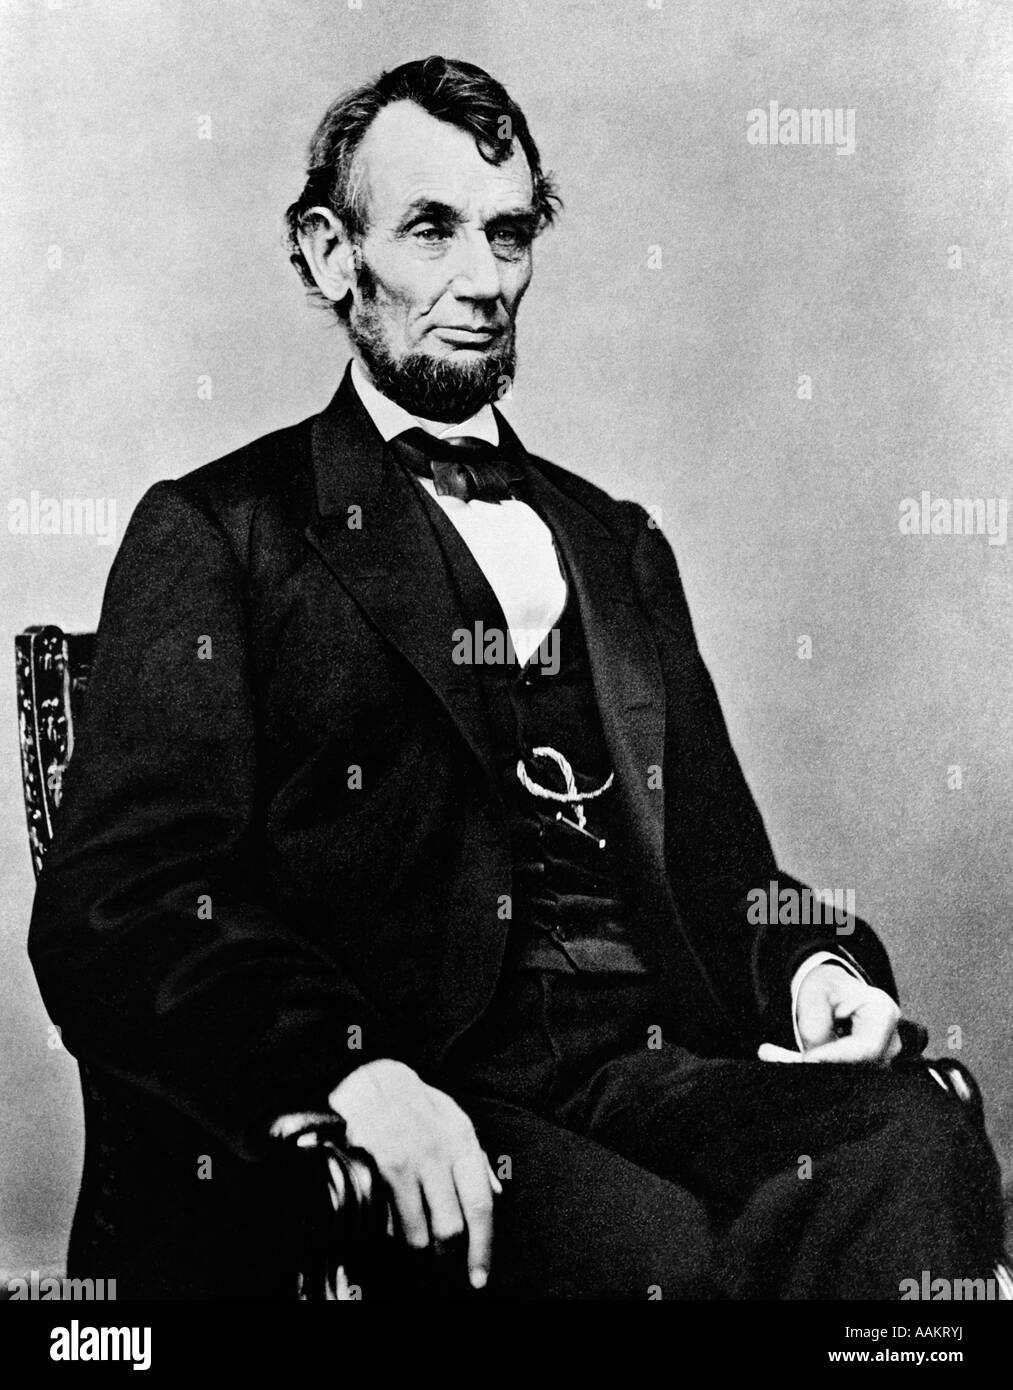 ABRAHAM LINCOLN 16TH PRESIDENT OF UNITED STATES DURING THE CIVIL WAR 1861 - 1865 SEATED PORTRAIT CIRCA 1864 Stock Photo